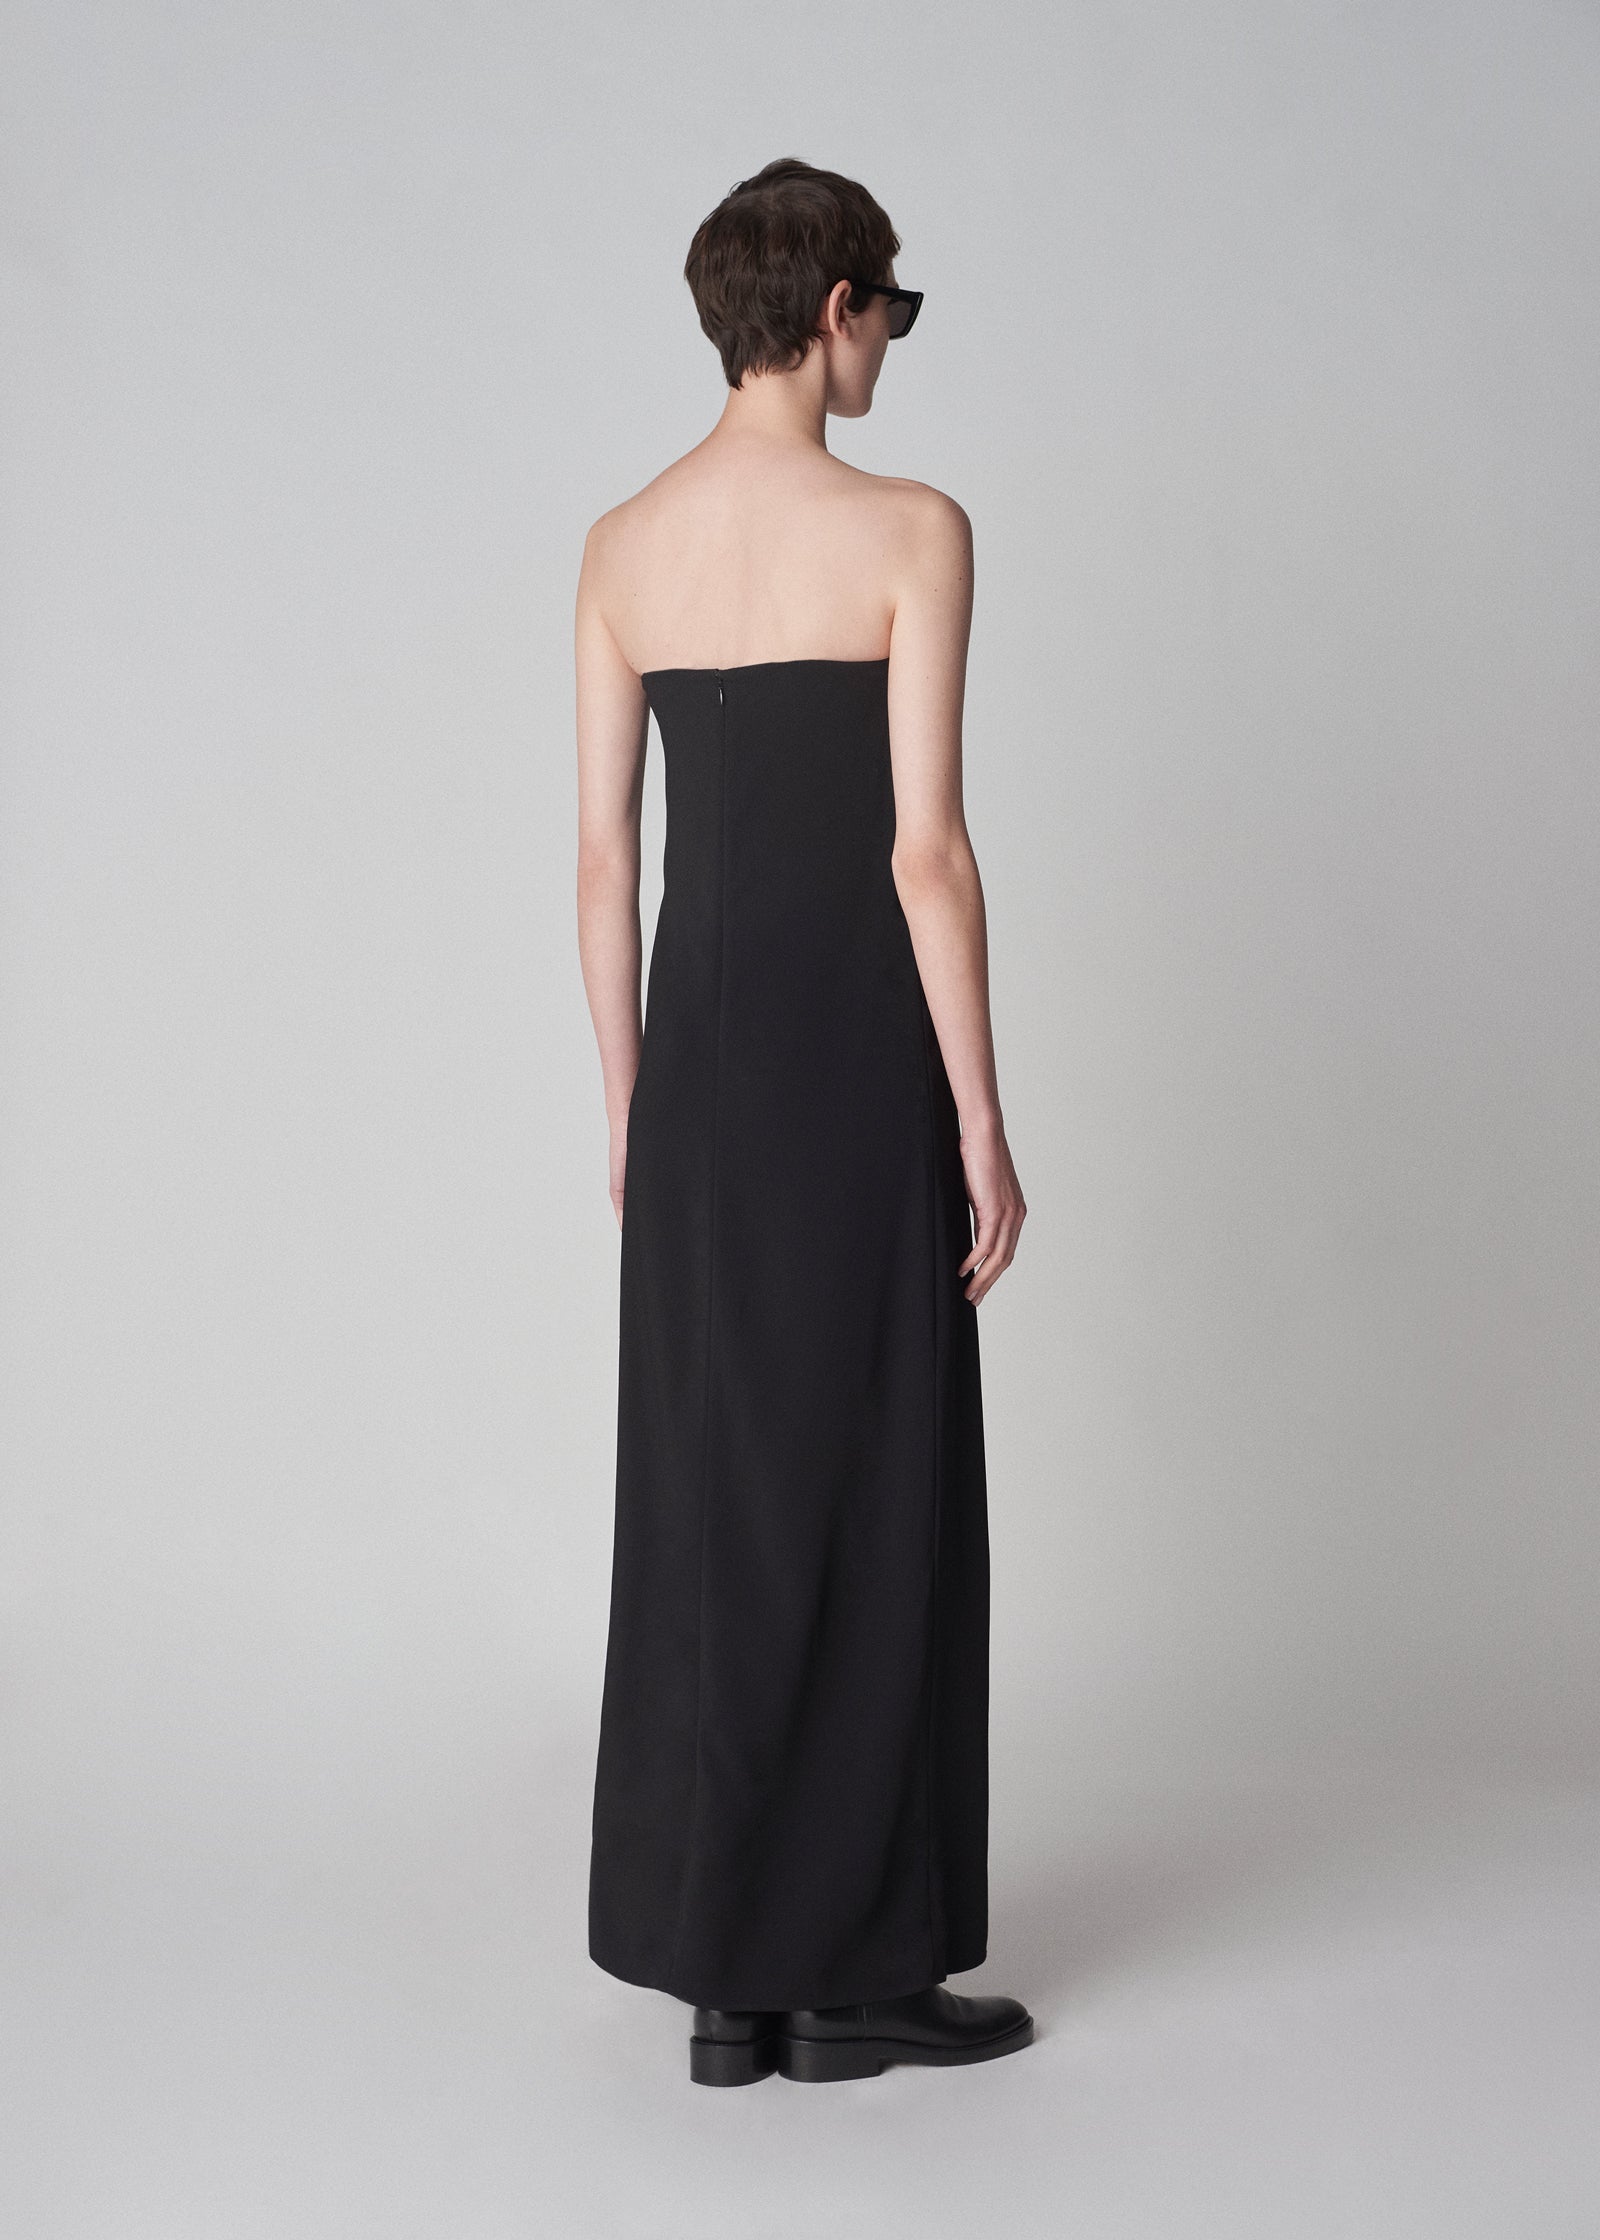 Strapless Column Dress in Viscose Crepe - Black - CO Collections